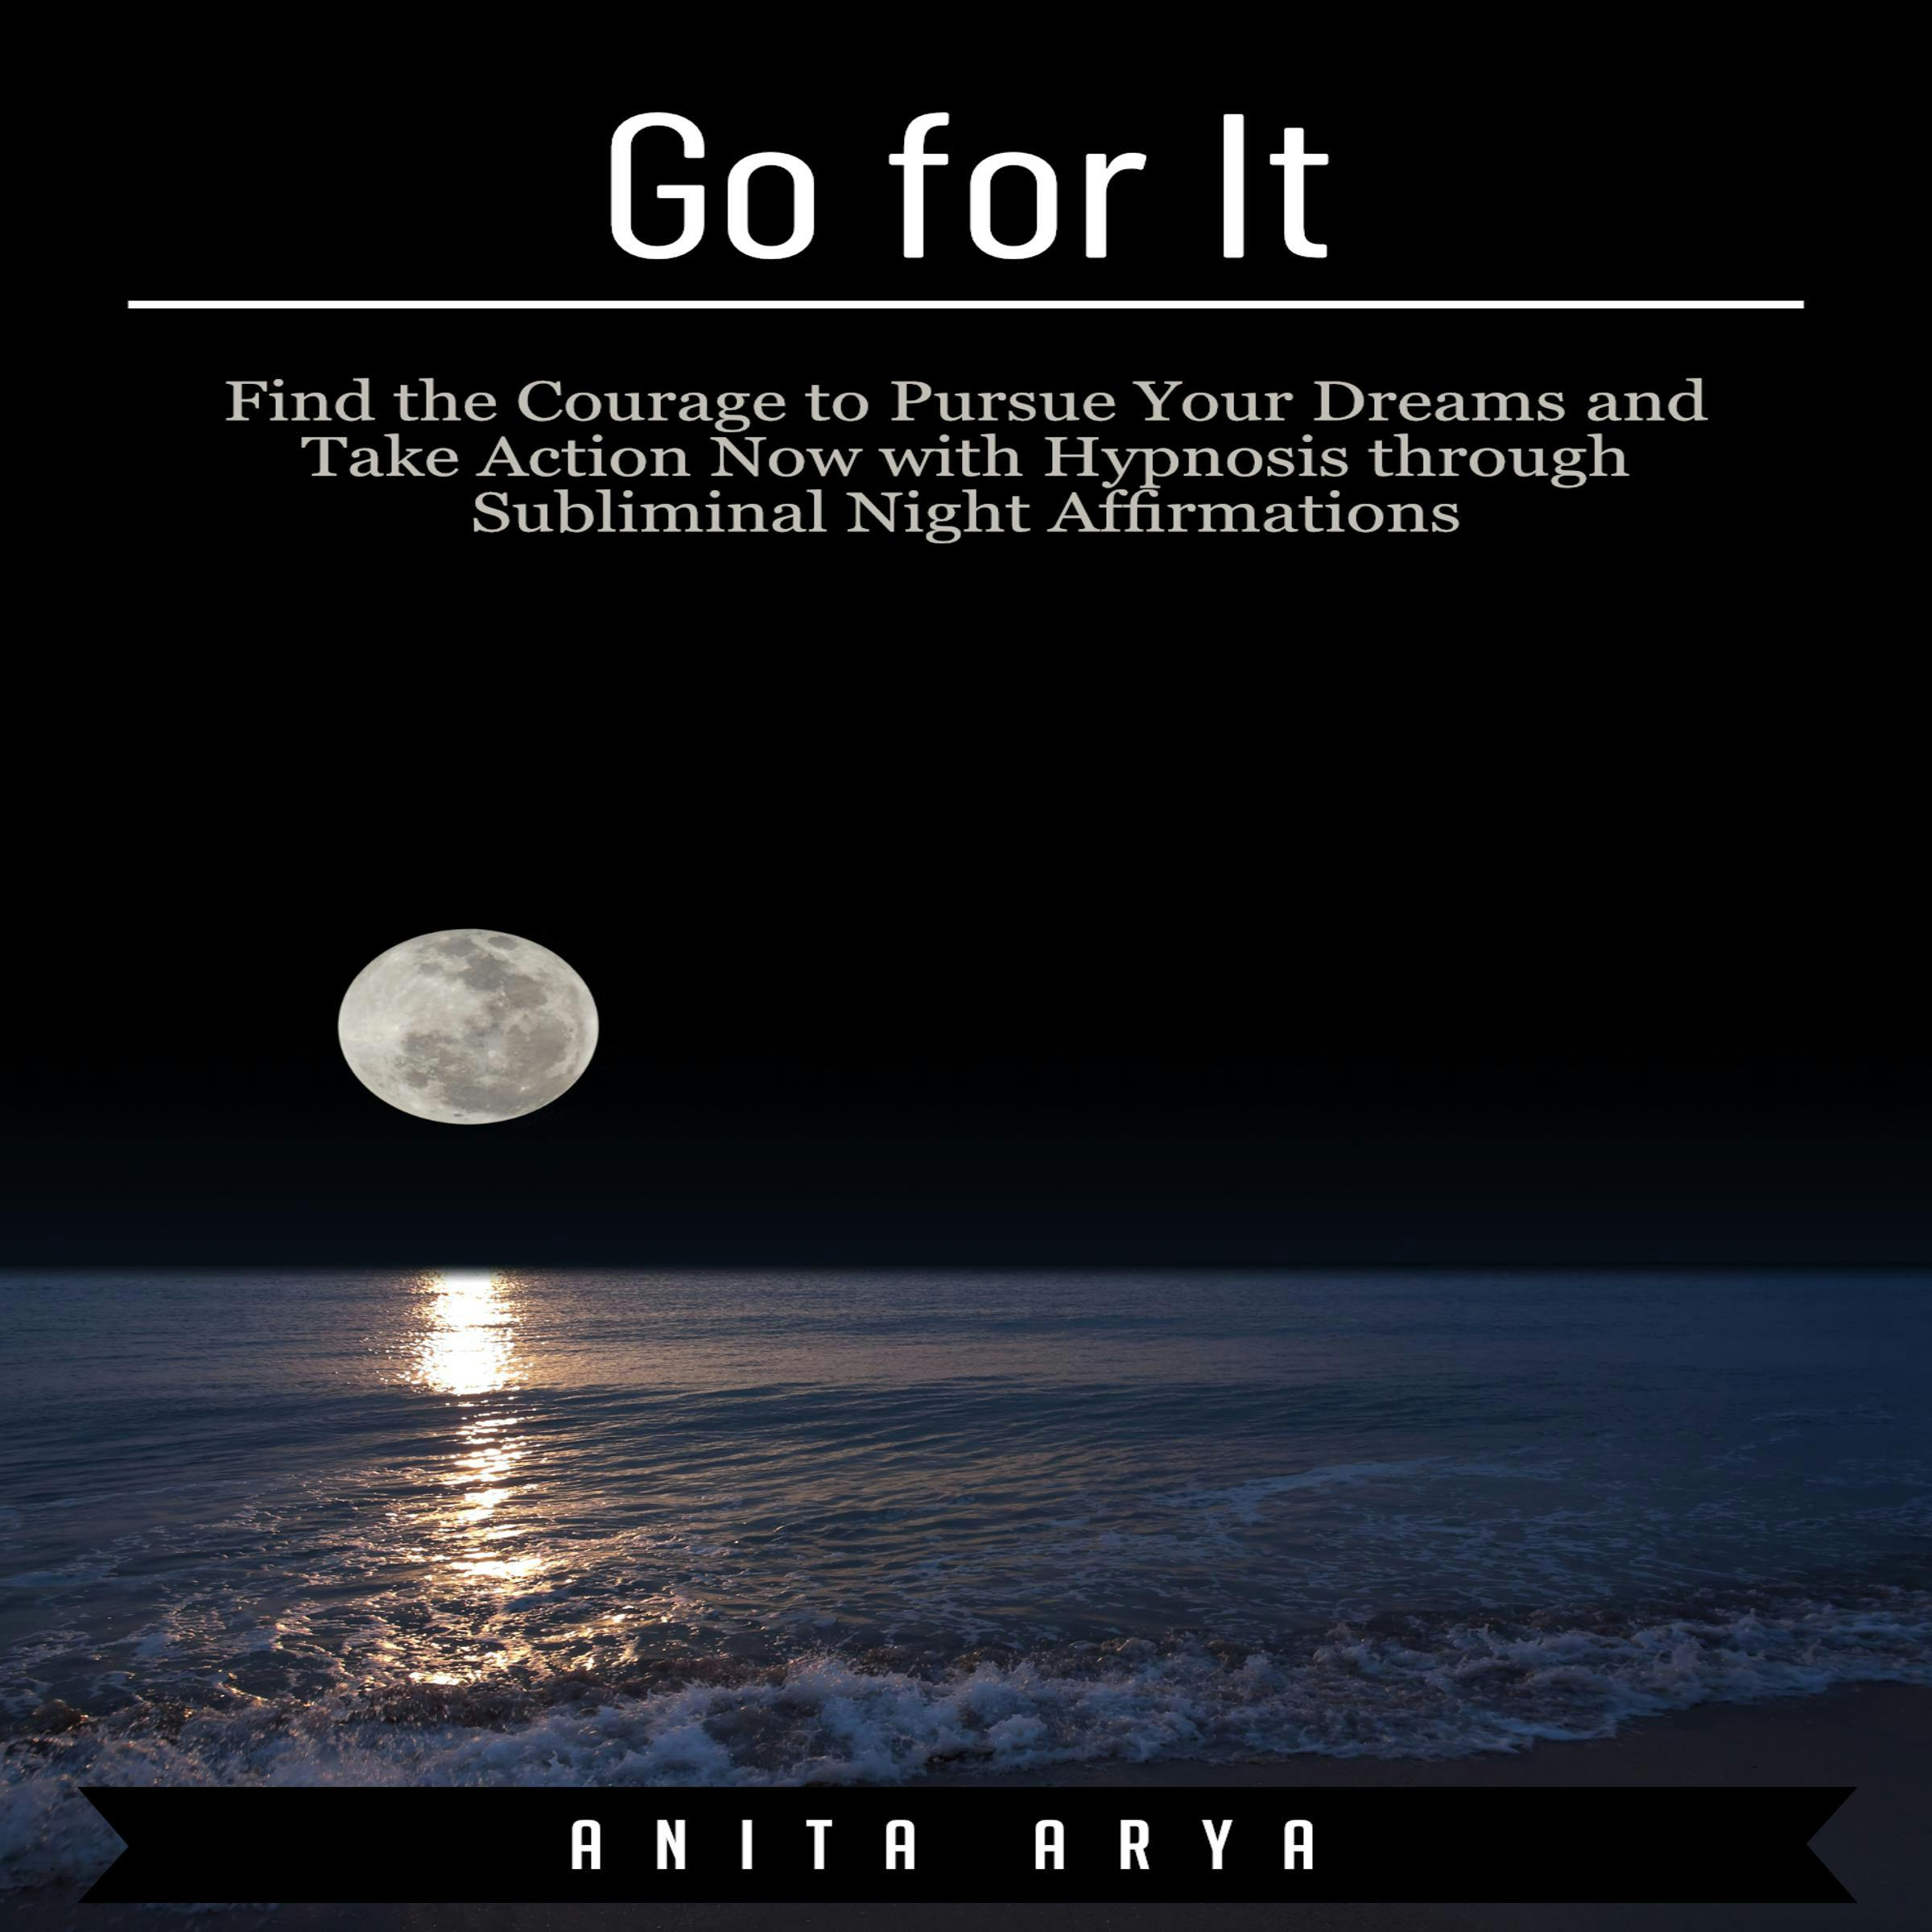 Go for It: Find the Courage to Pursue Your Dreams and Take Action Now with Hypnosis through Subliminal Night Affirmations - Anita Arya